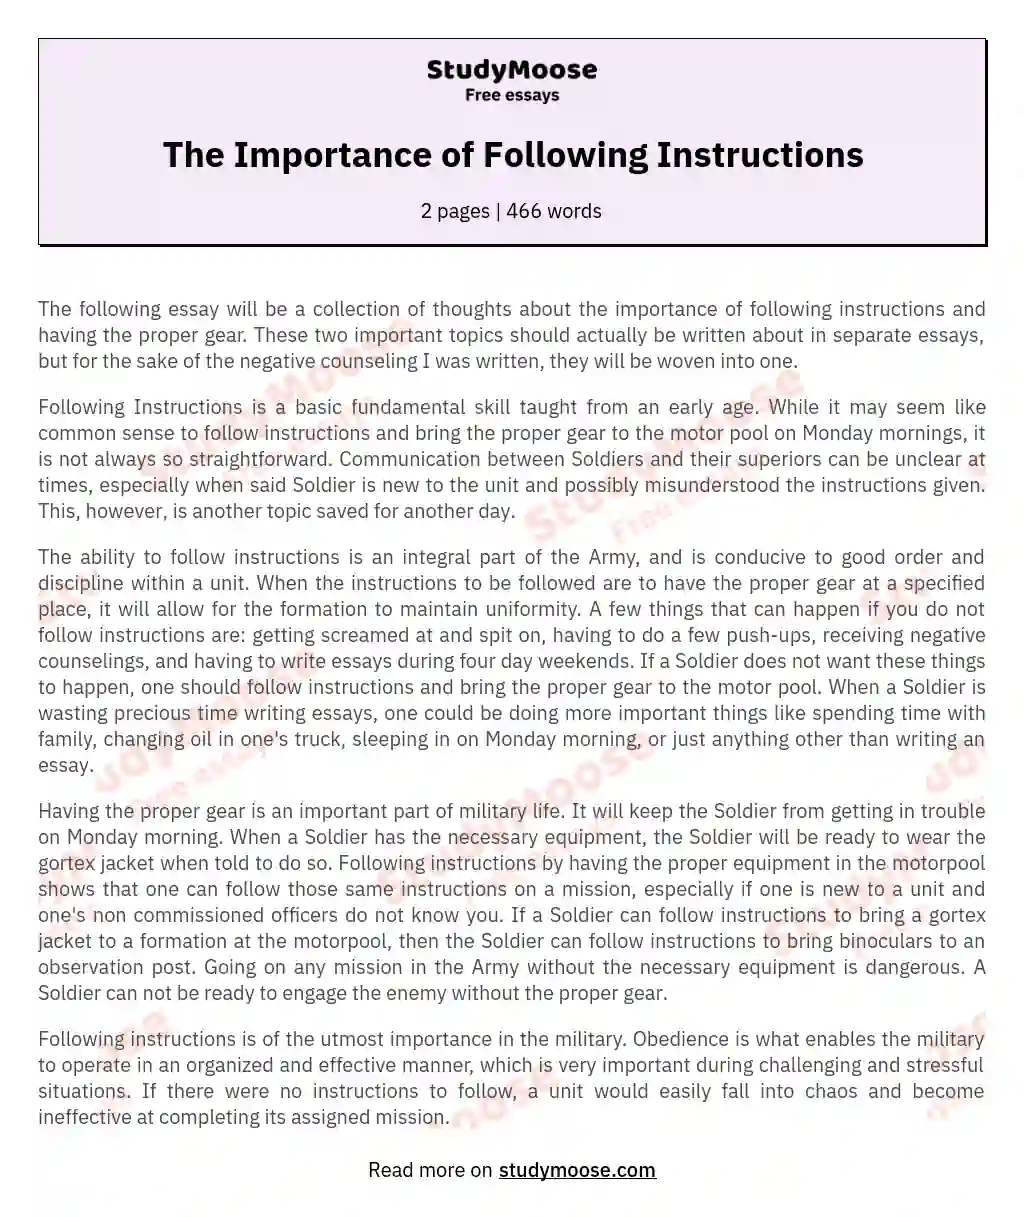 The Importance of Following Instructions essay